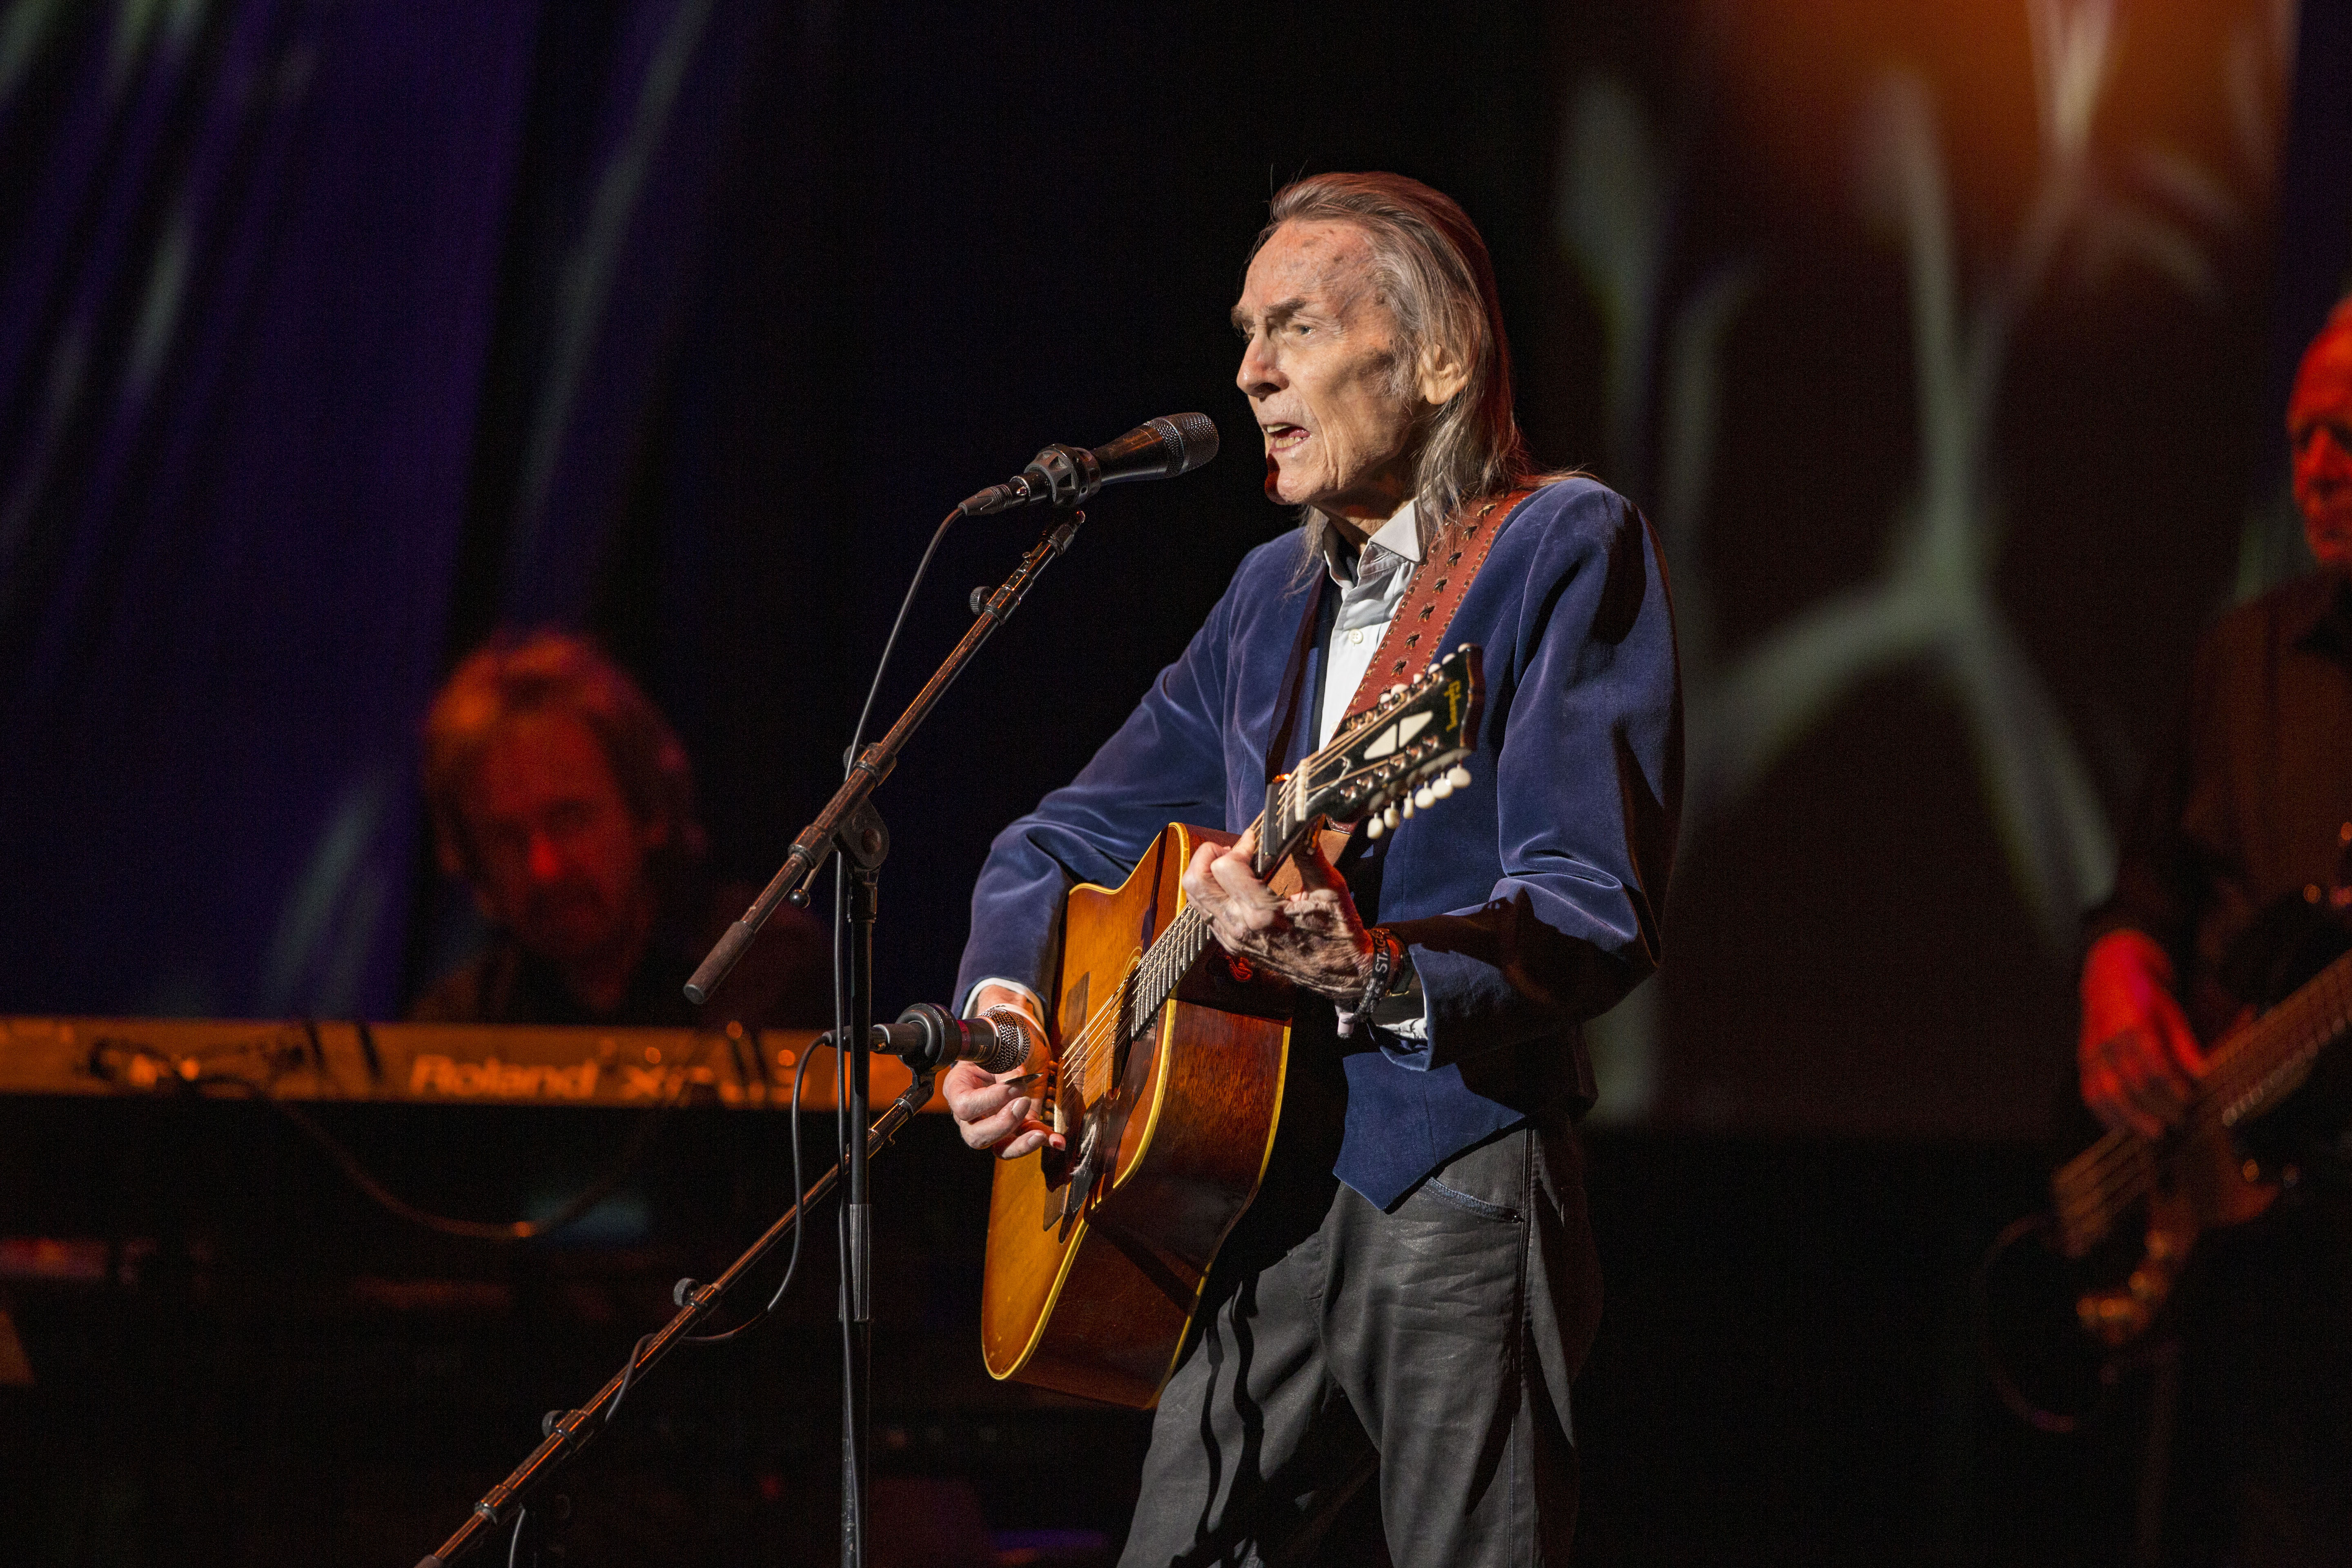 Gordon Lightfoot performs on stage at Balboa Theatre on March 13, 2019 in San Diego, California | Source: Getty Images